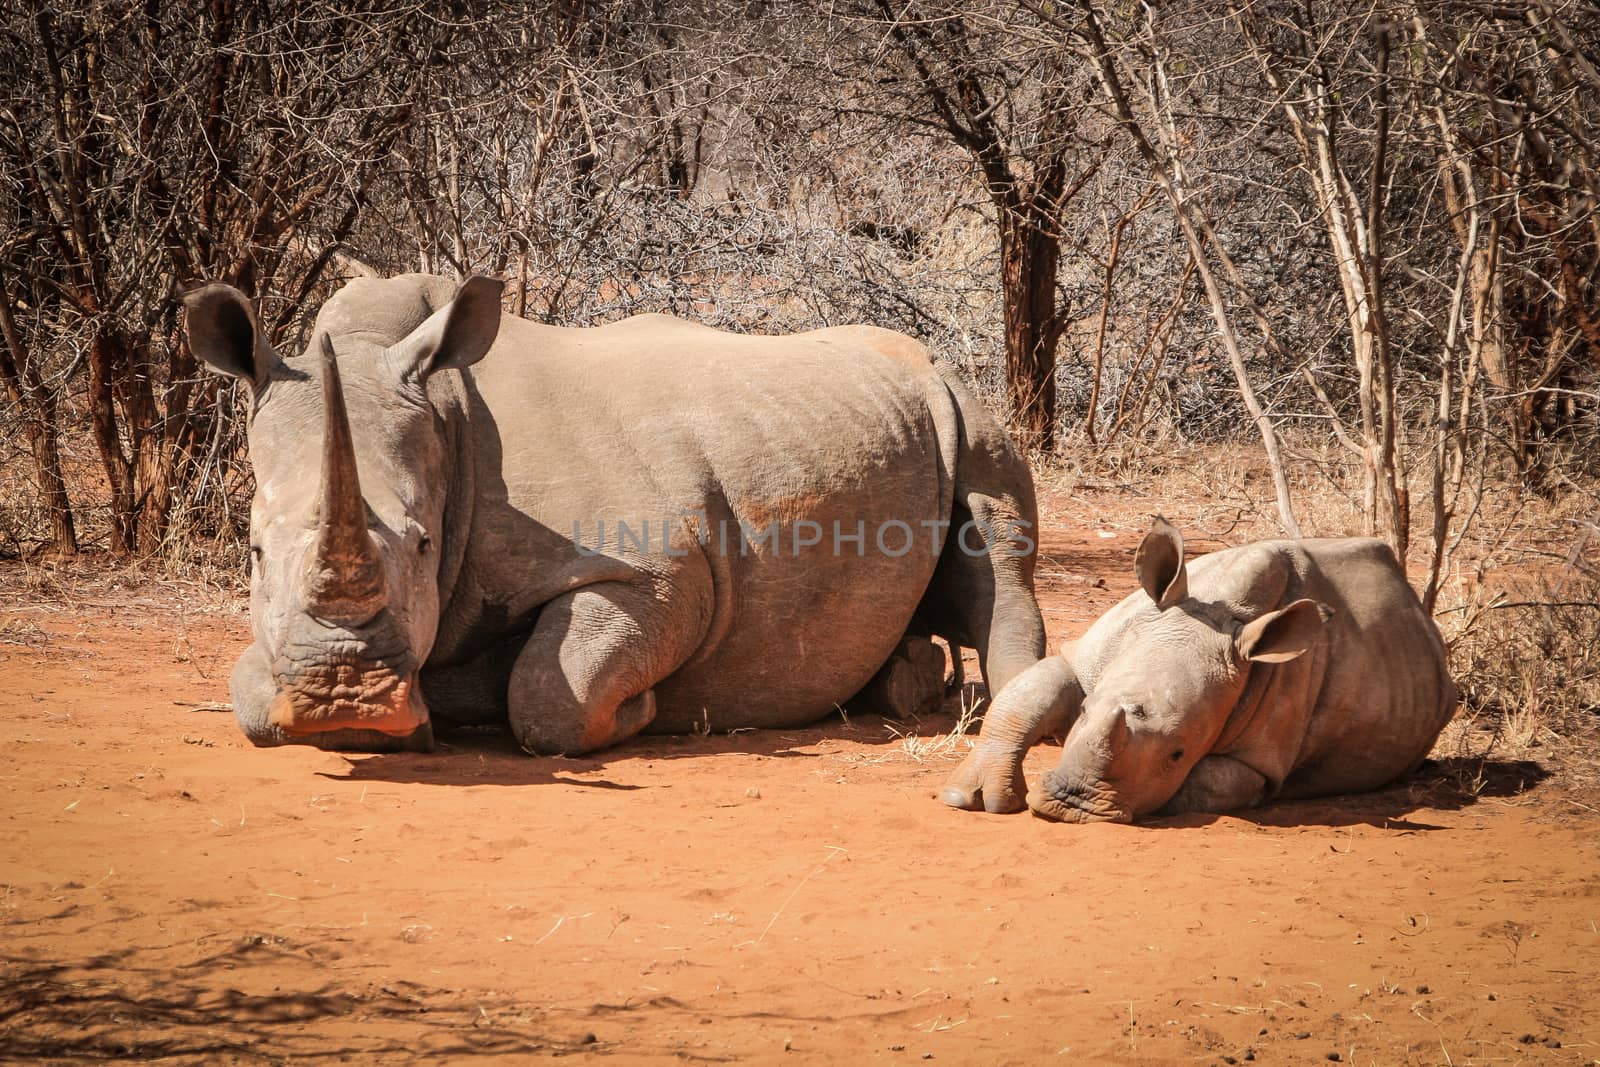 Mother White rhino with a baby Rhino, South Africa.